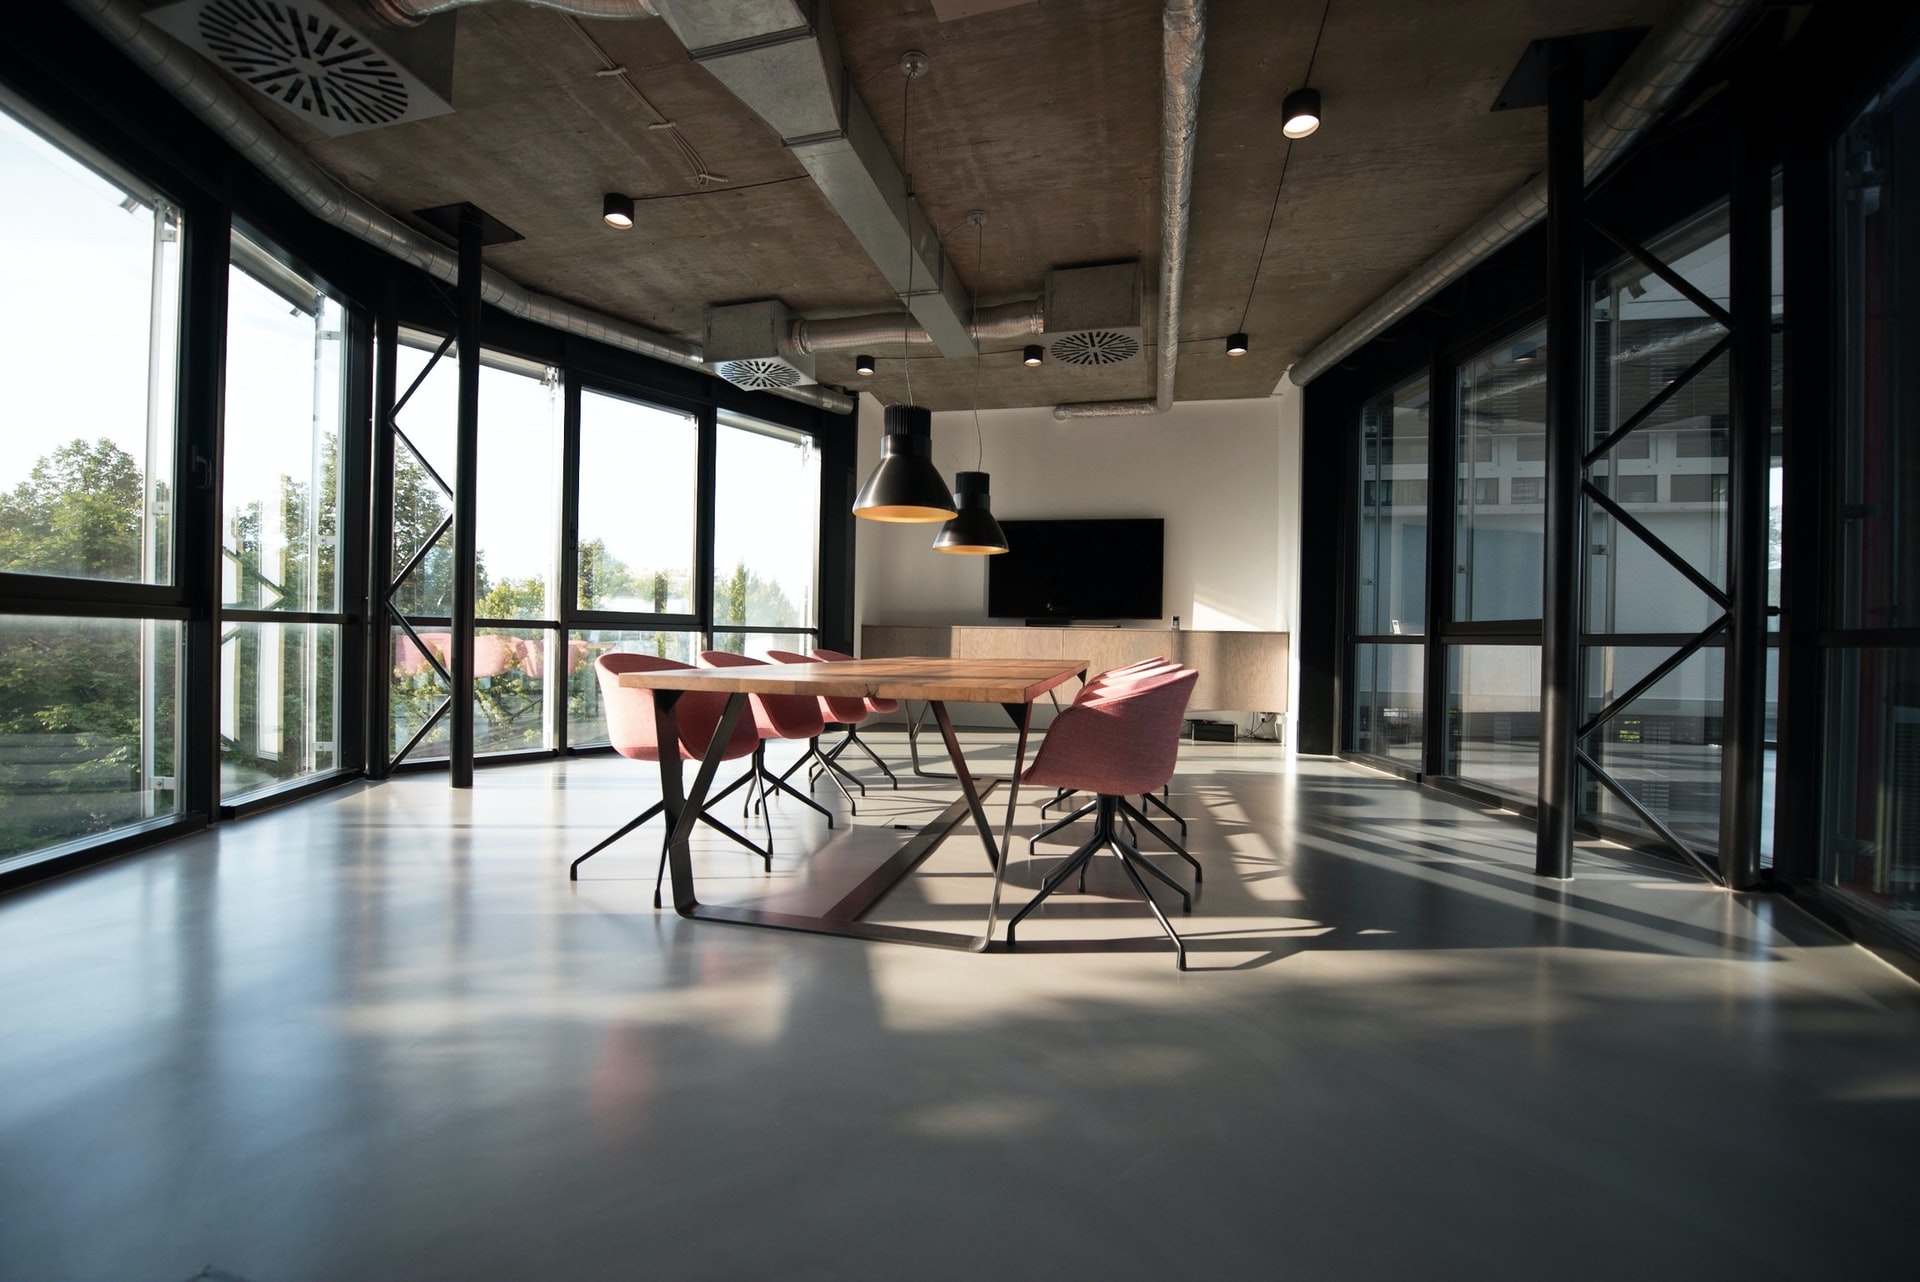 A conference room with a industrial style